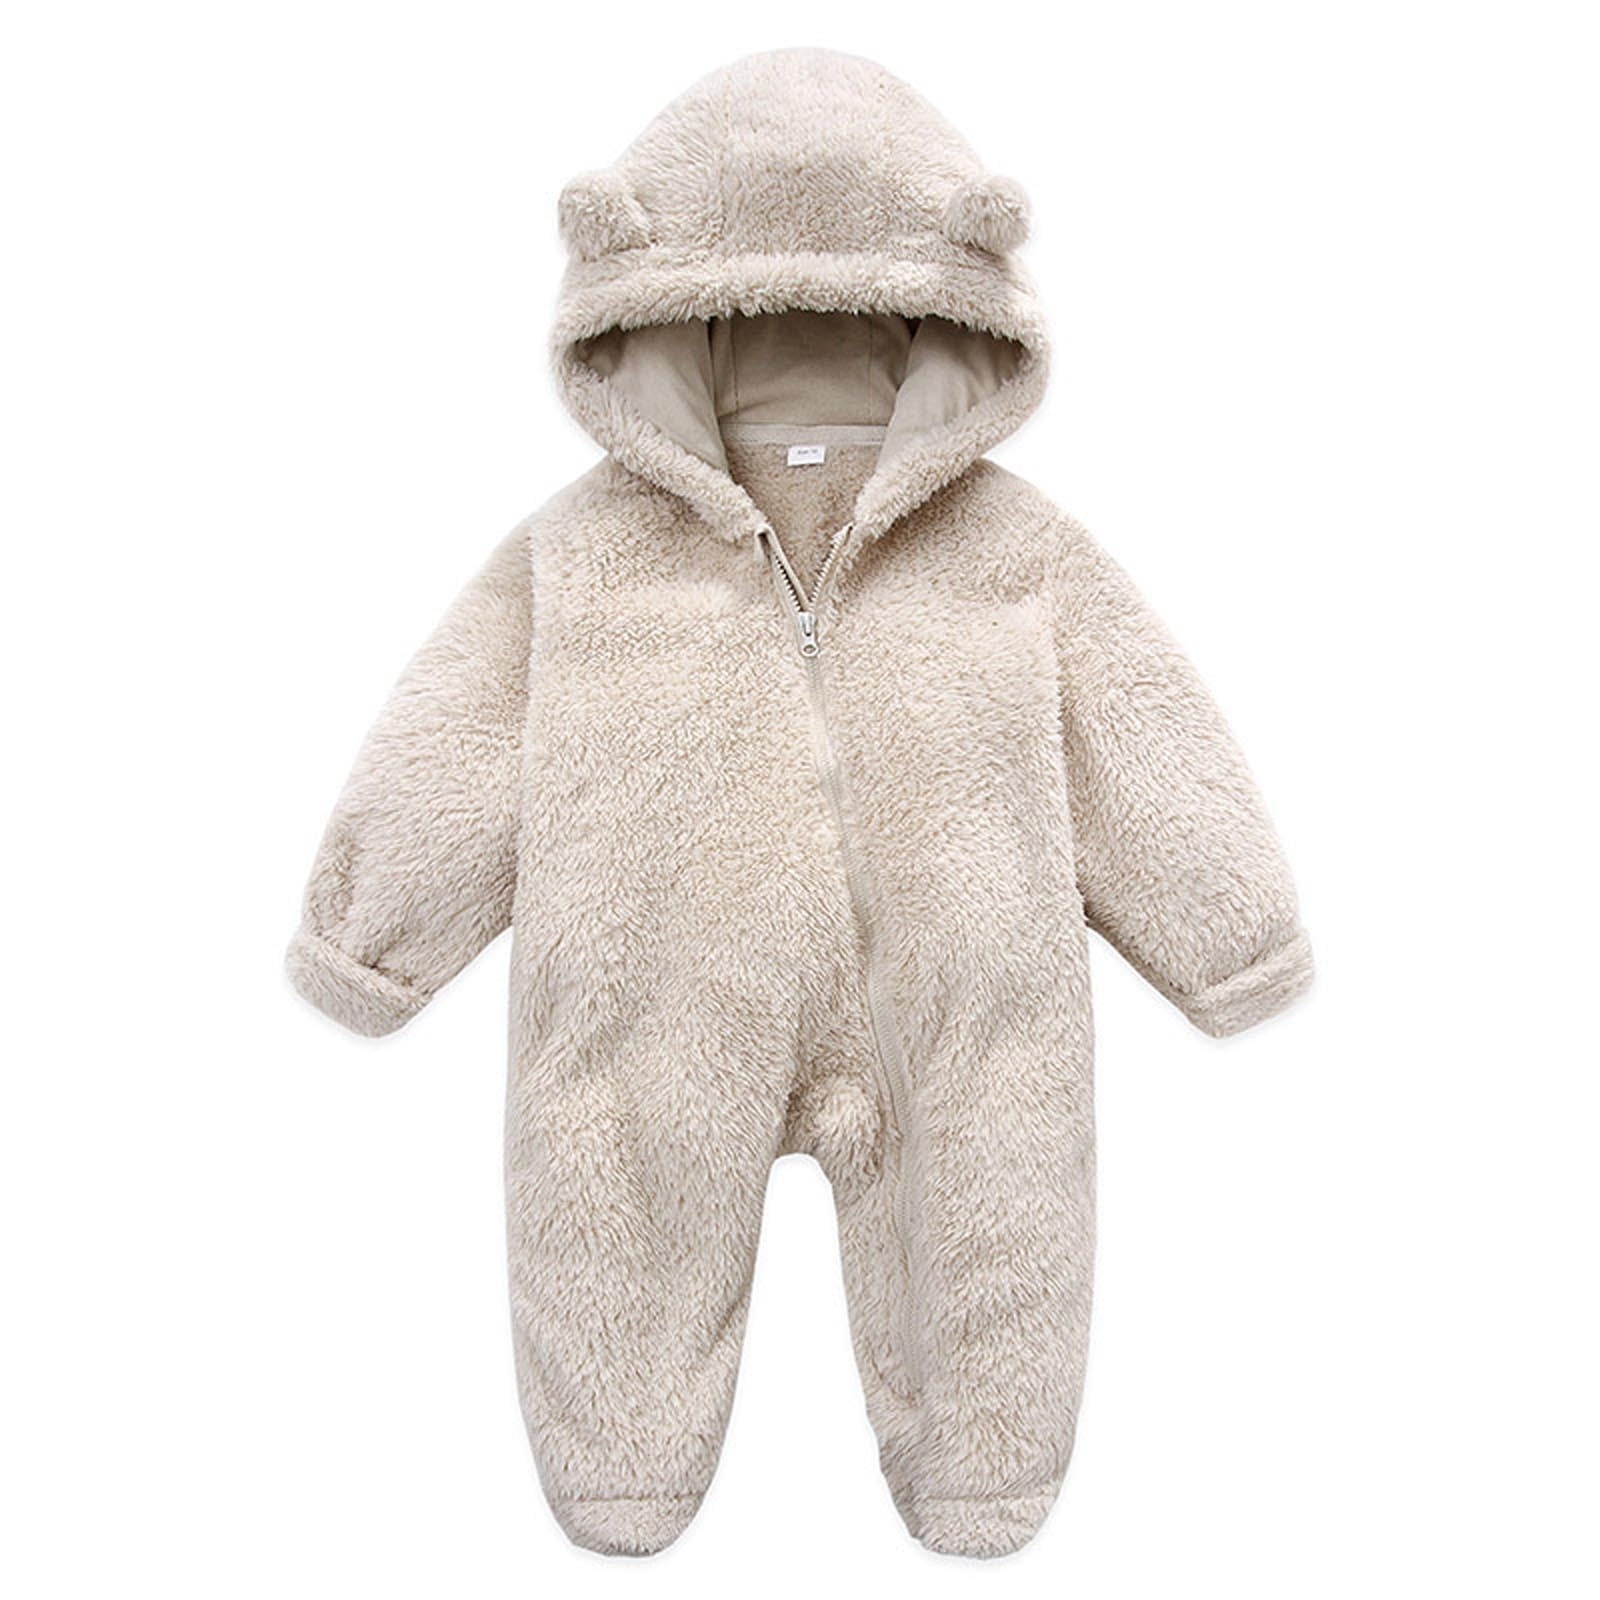 New photography clothing baby bear coral fleece jumpsuit for newborn 6month  100 days autumn winter set infant photo suit